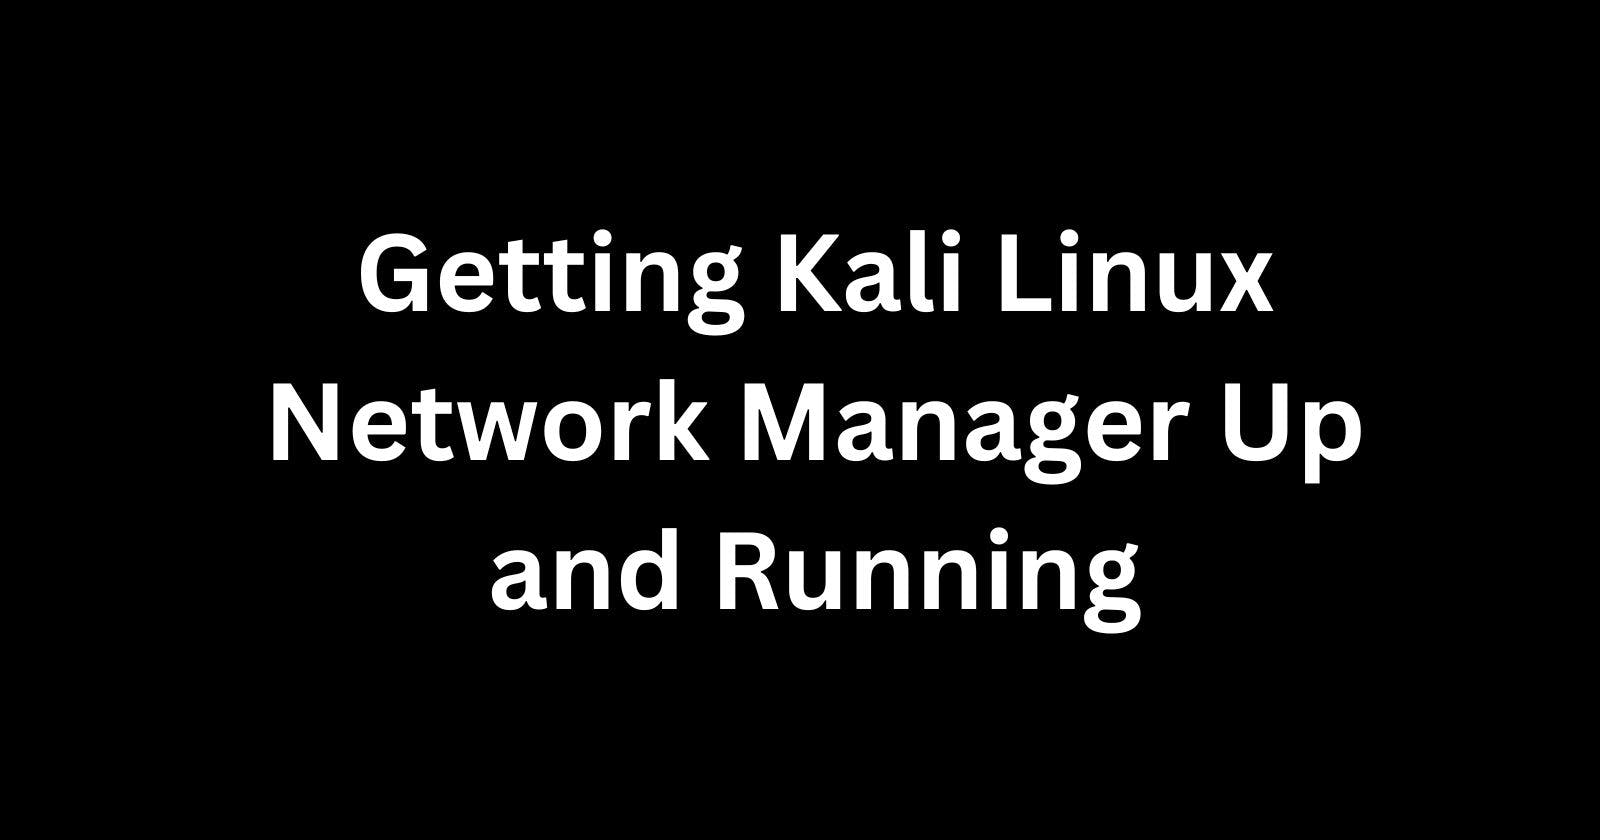 Getting Kali Linux Network Manager Up and Running